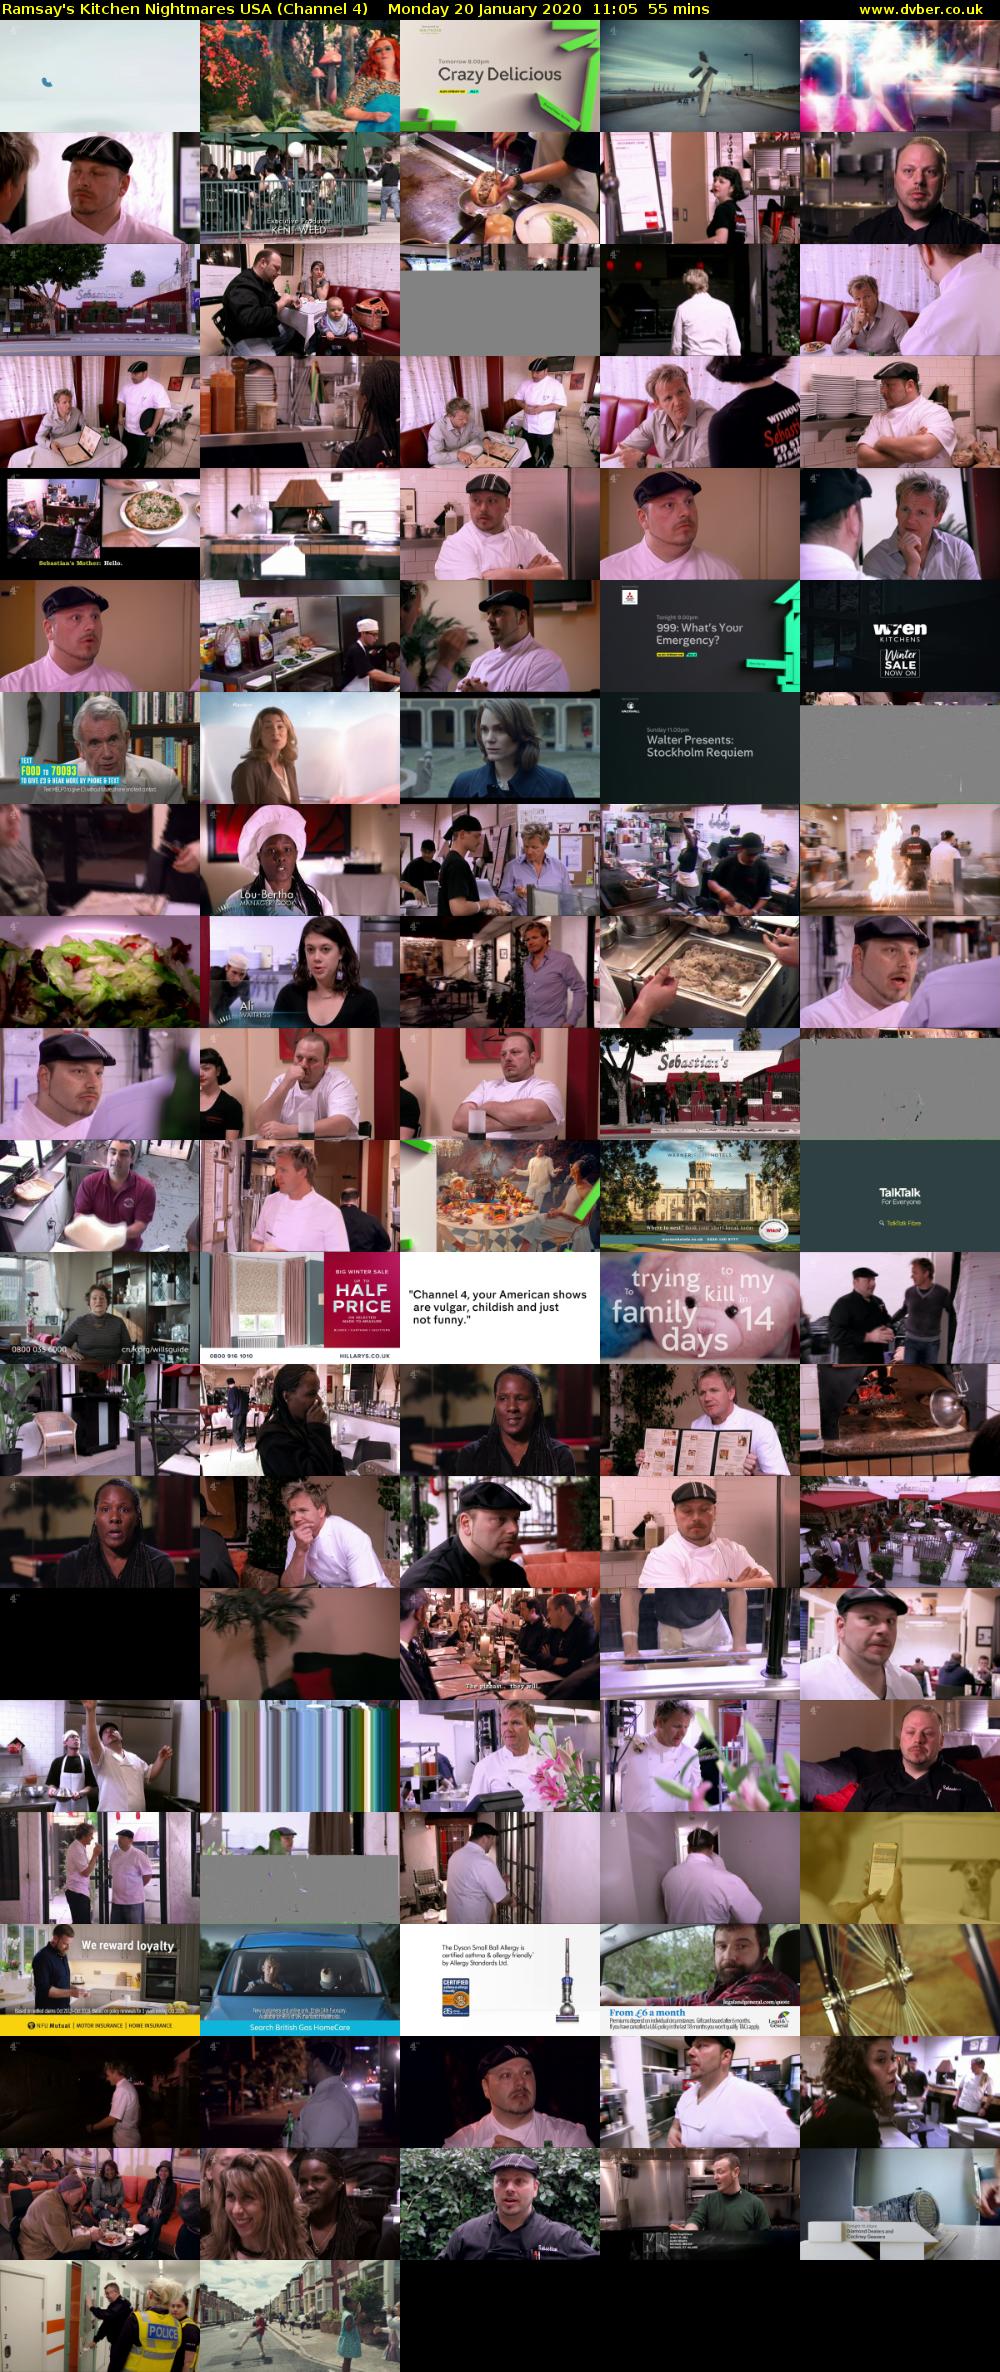 Ramsay's Kitchen Nightmares USA (Channel 4) Monday 20 January 2020 11:05 - 12:00